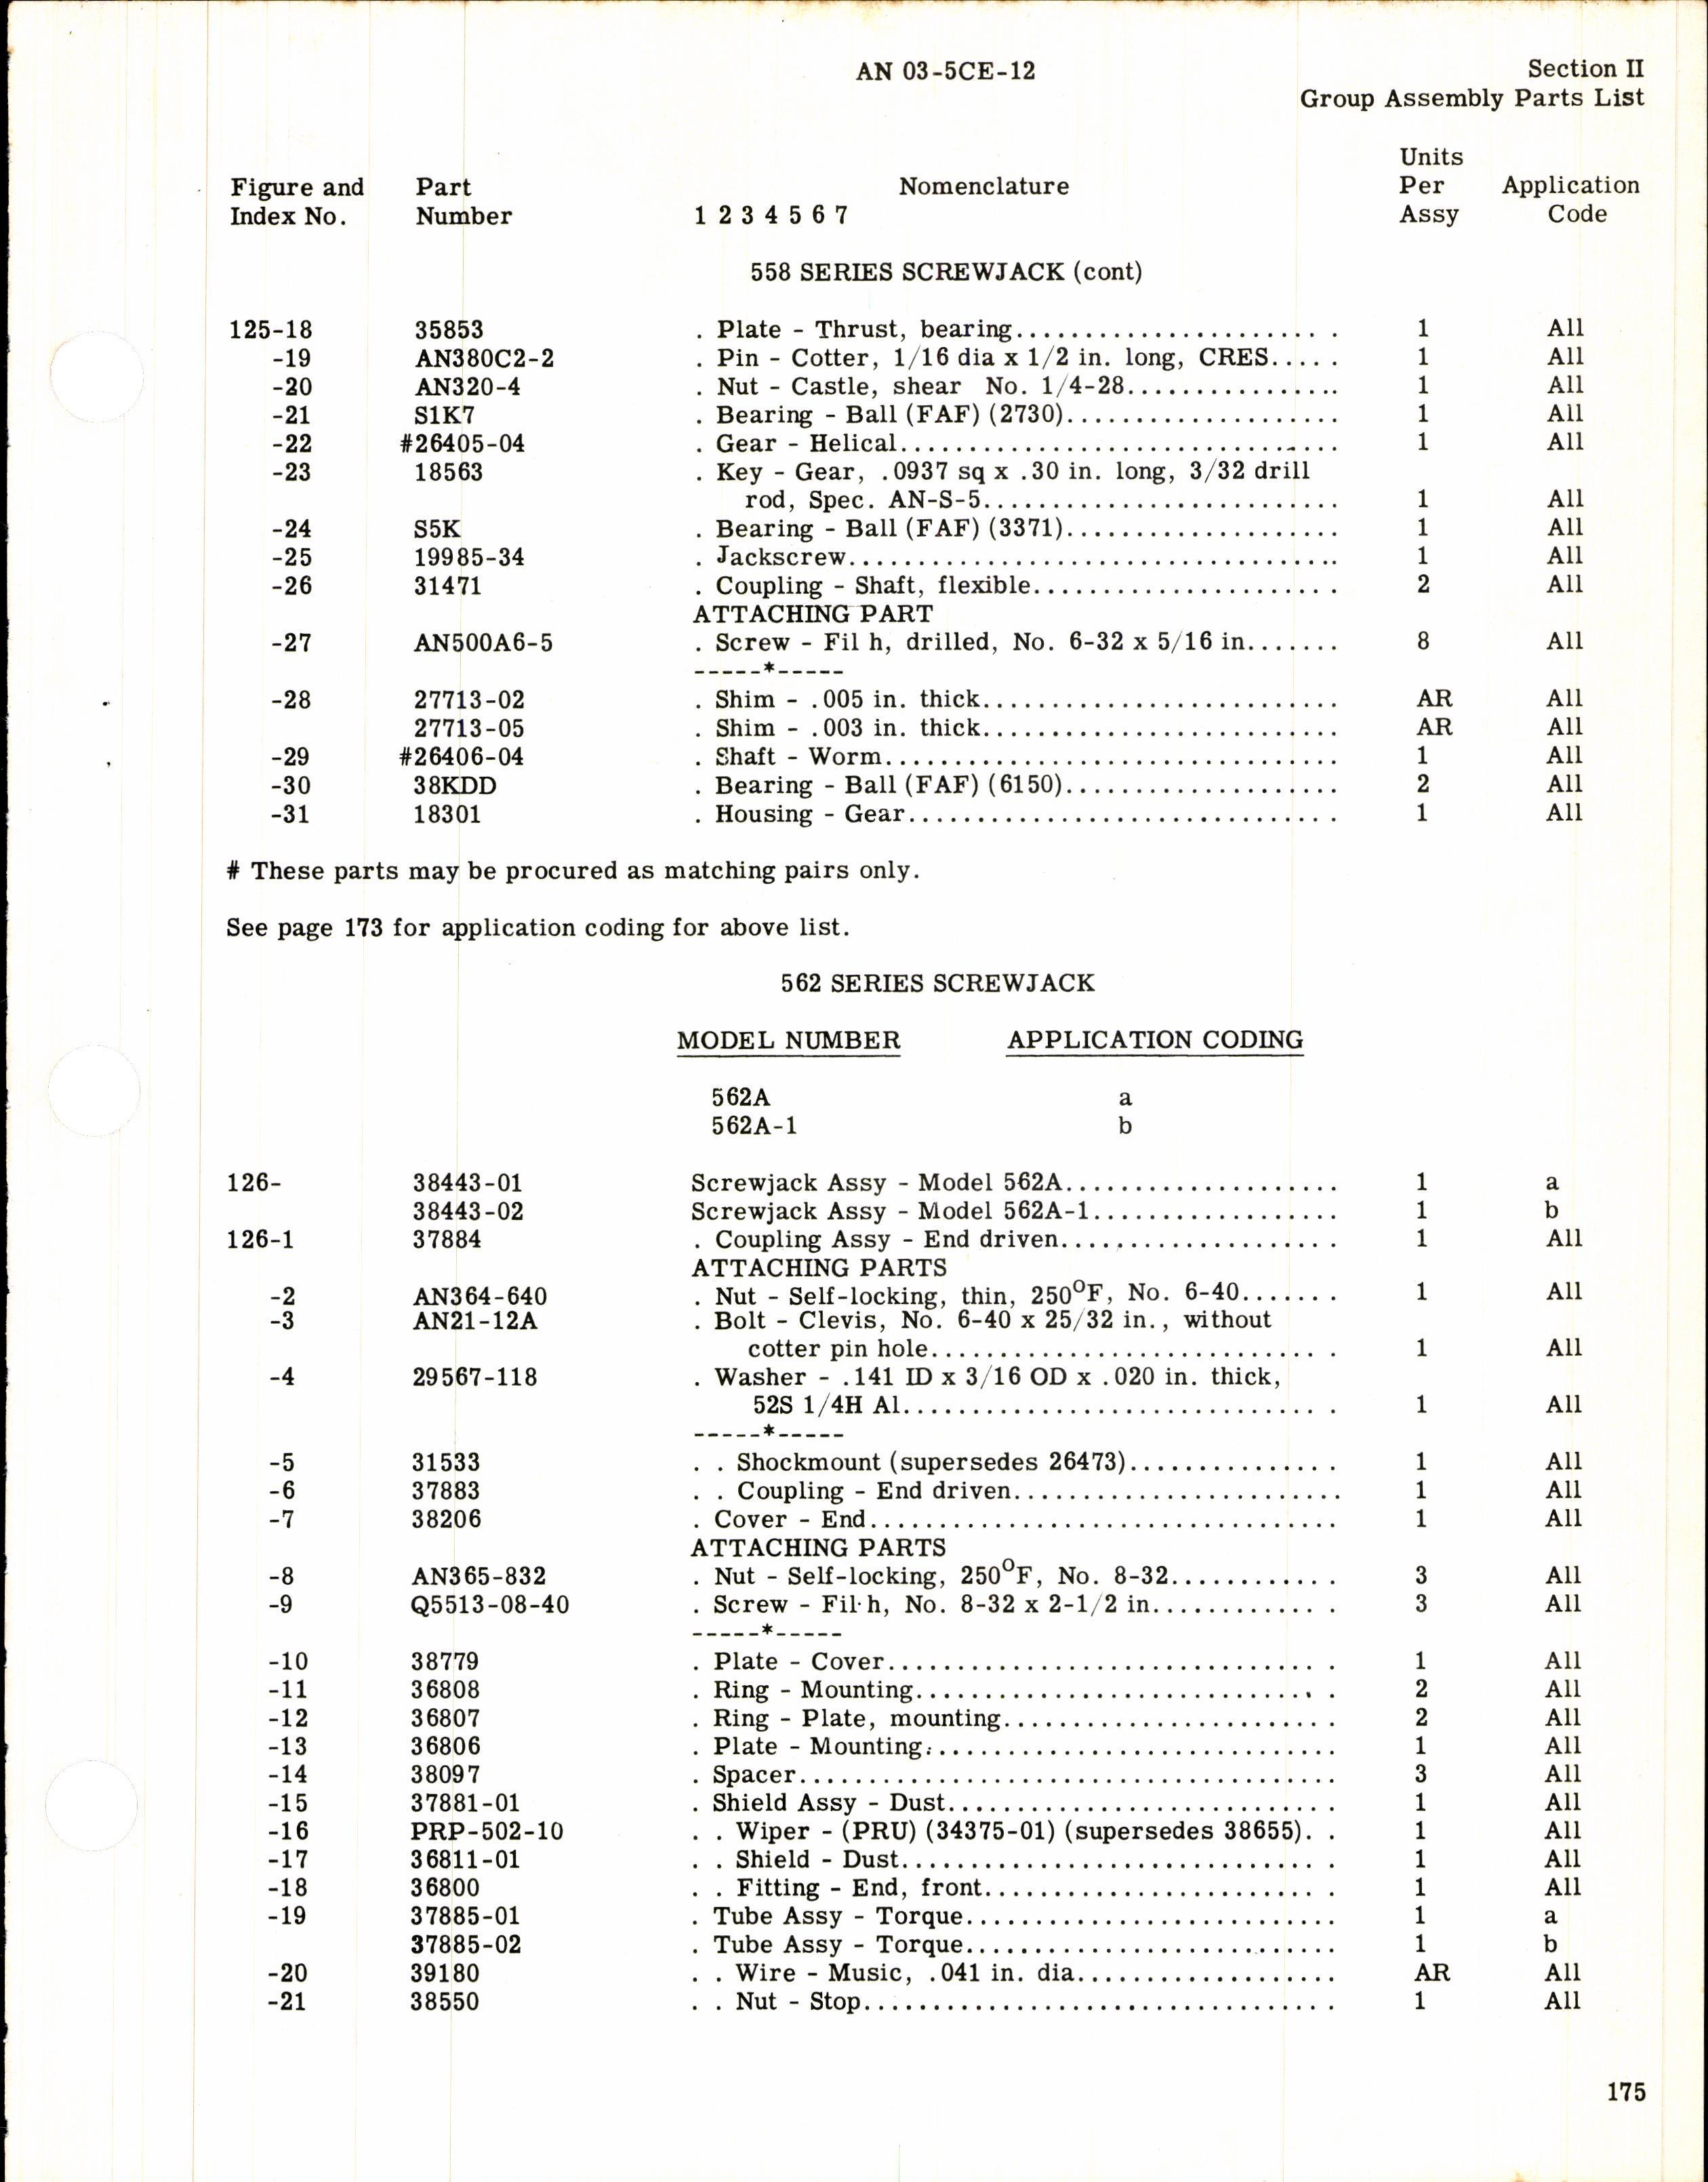 Sample page 5 from AirCorps Library document: Parts Catalog for Gearboxes, Screwjacks, Flexible Shafting, & Flexible Shaft Accessories